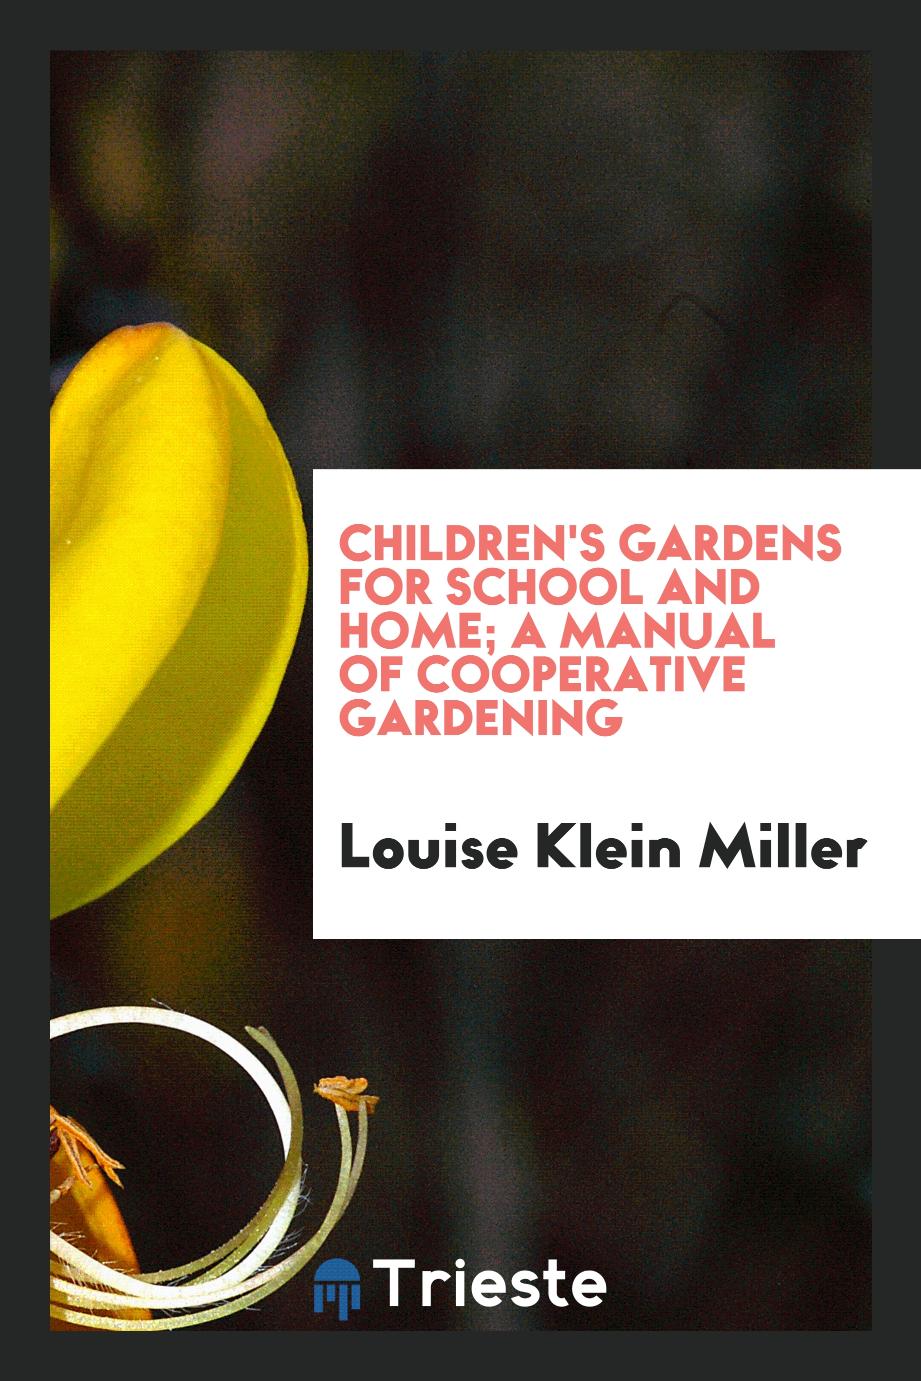 Children's gardens for school and home; a manual of cooperative gardening